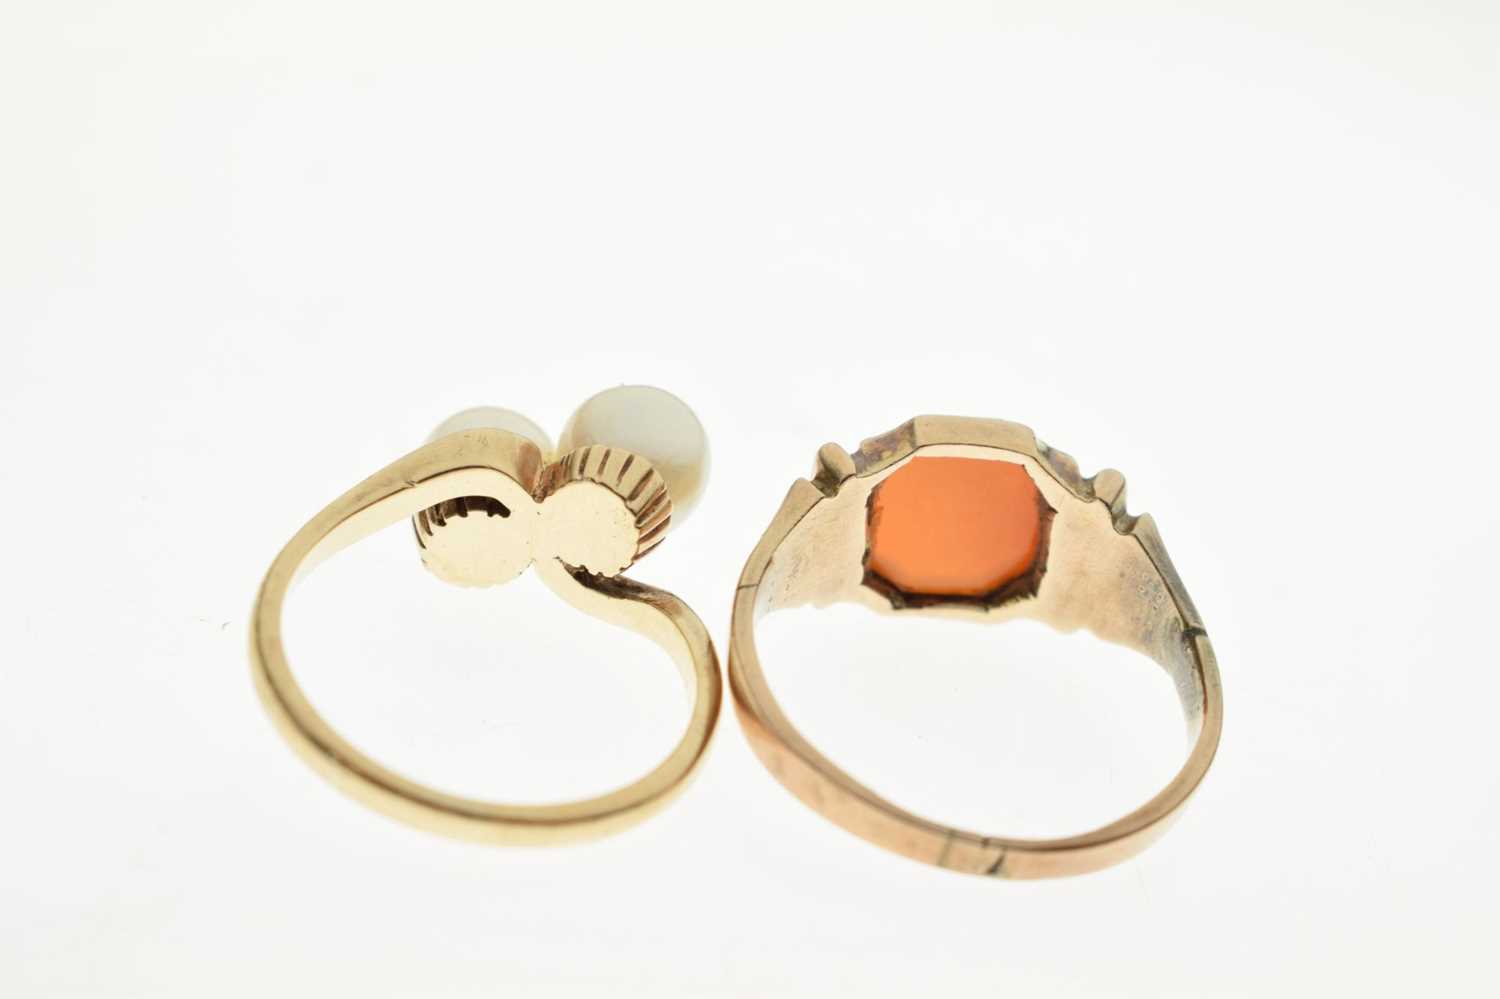 Carnelian 9ct gold signet ring and a pearl 9ct gold ring (2) - Image 3 of 6